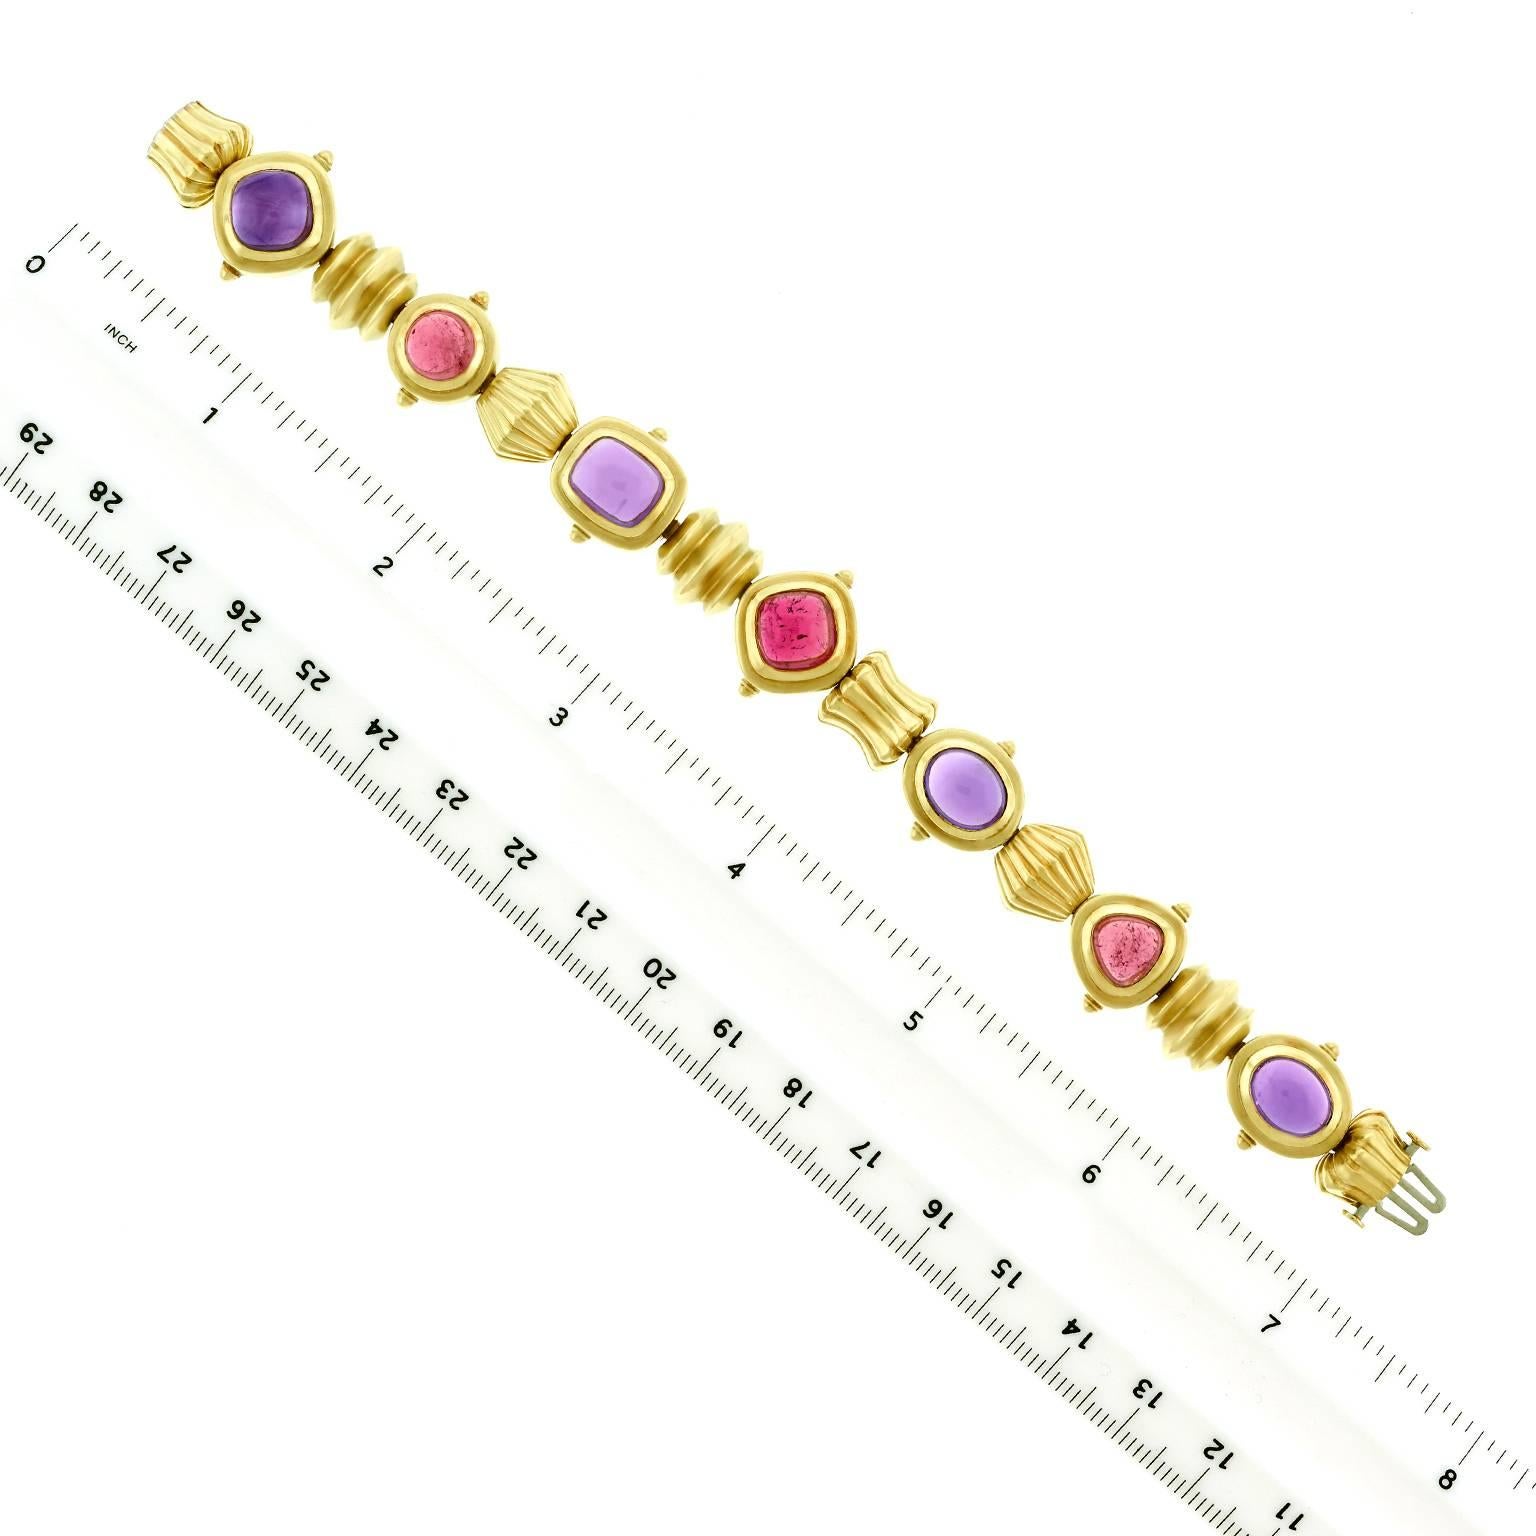 Seidengang One-of-a-Kind Tourmaline and Amethyst Gold Bracelet 2